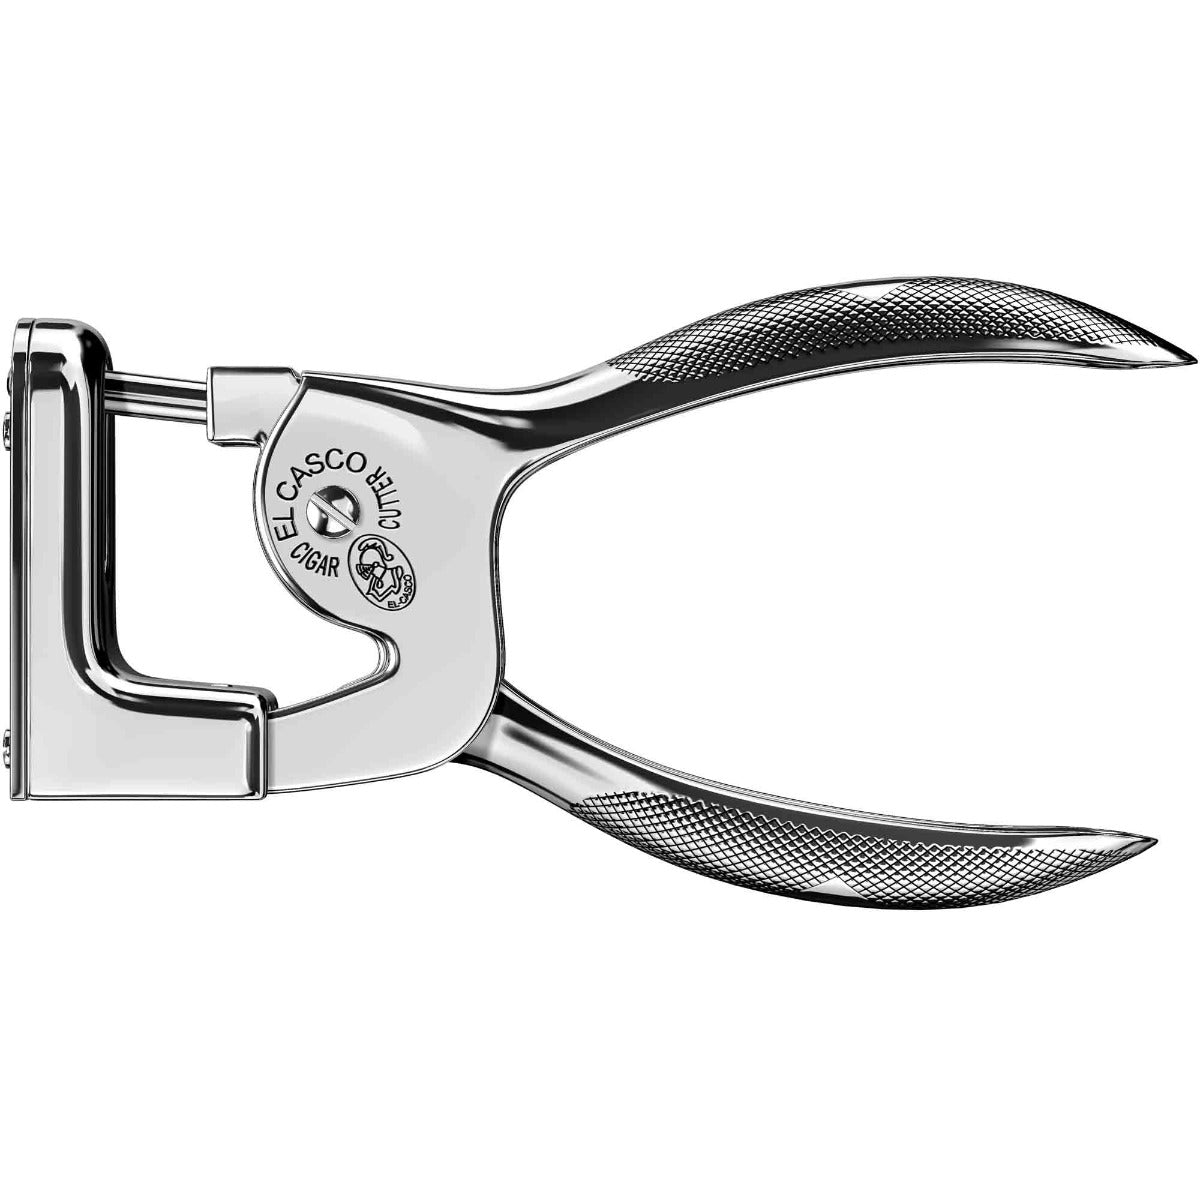 A pair of El Casco pliers for the perfect cut.